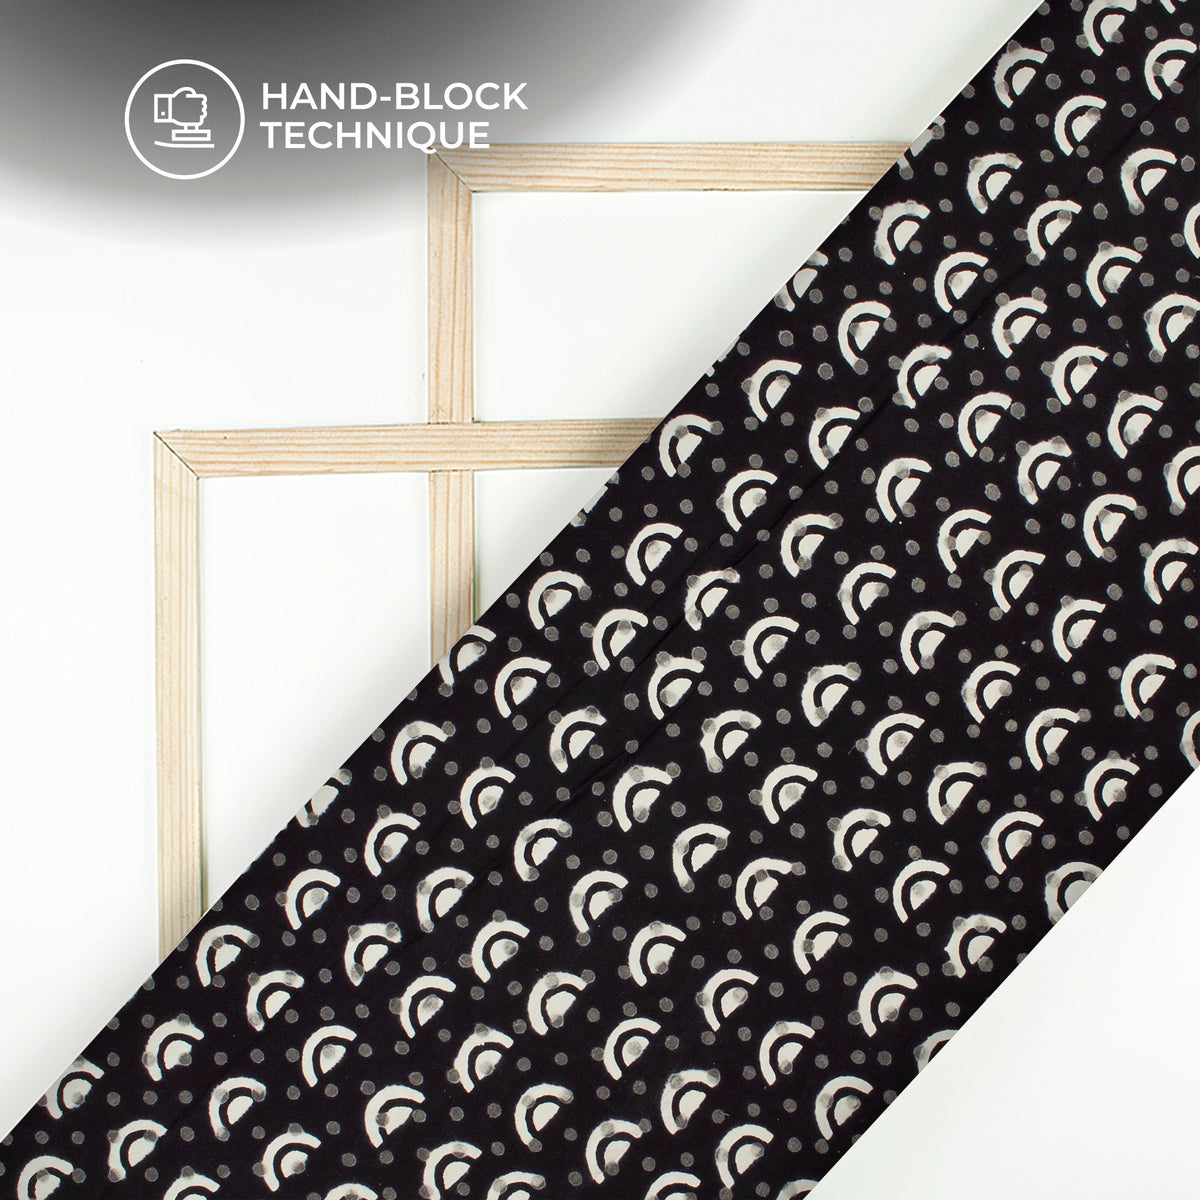 What Is A Hand Block Fabric?